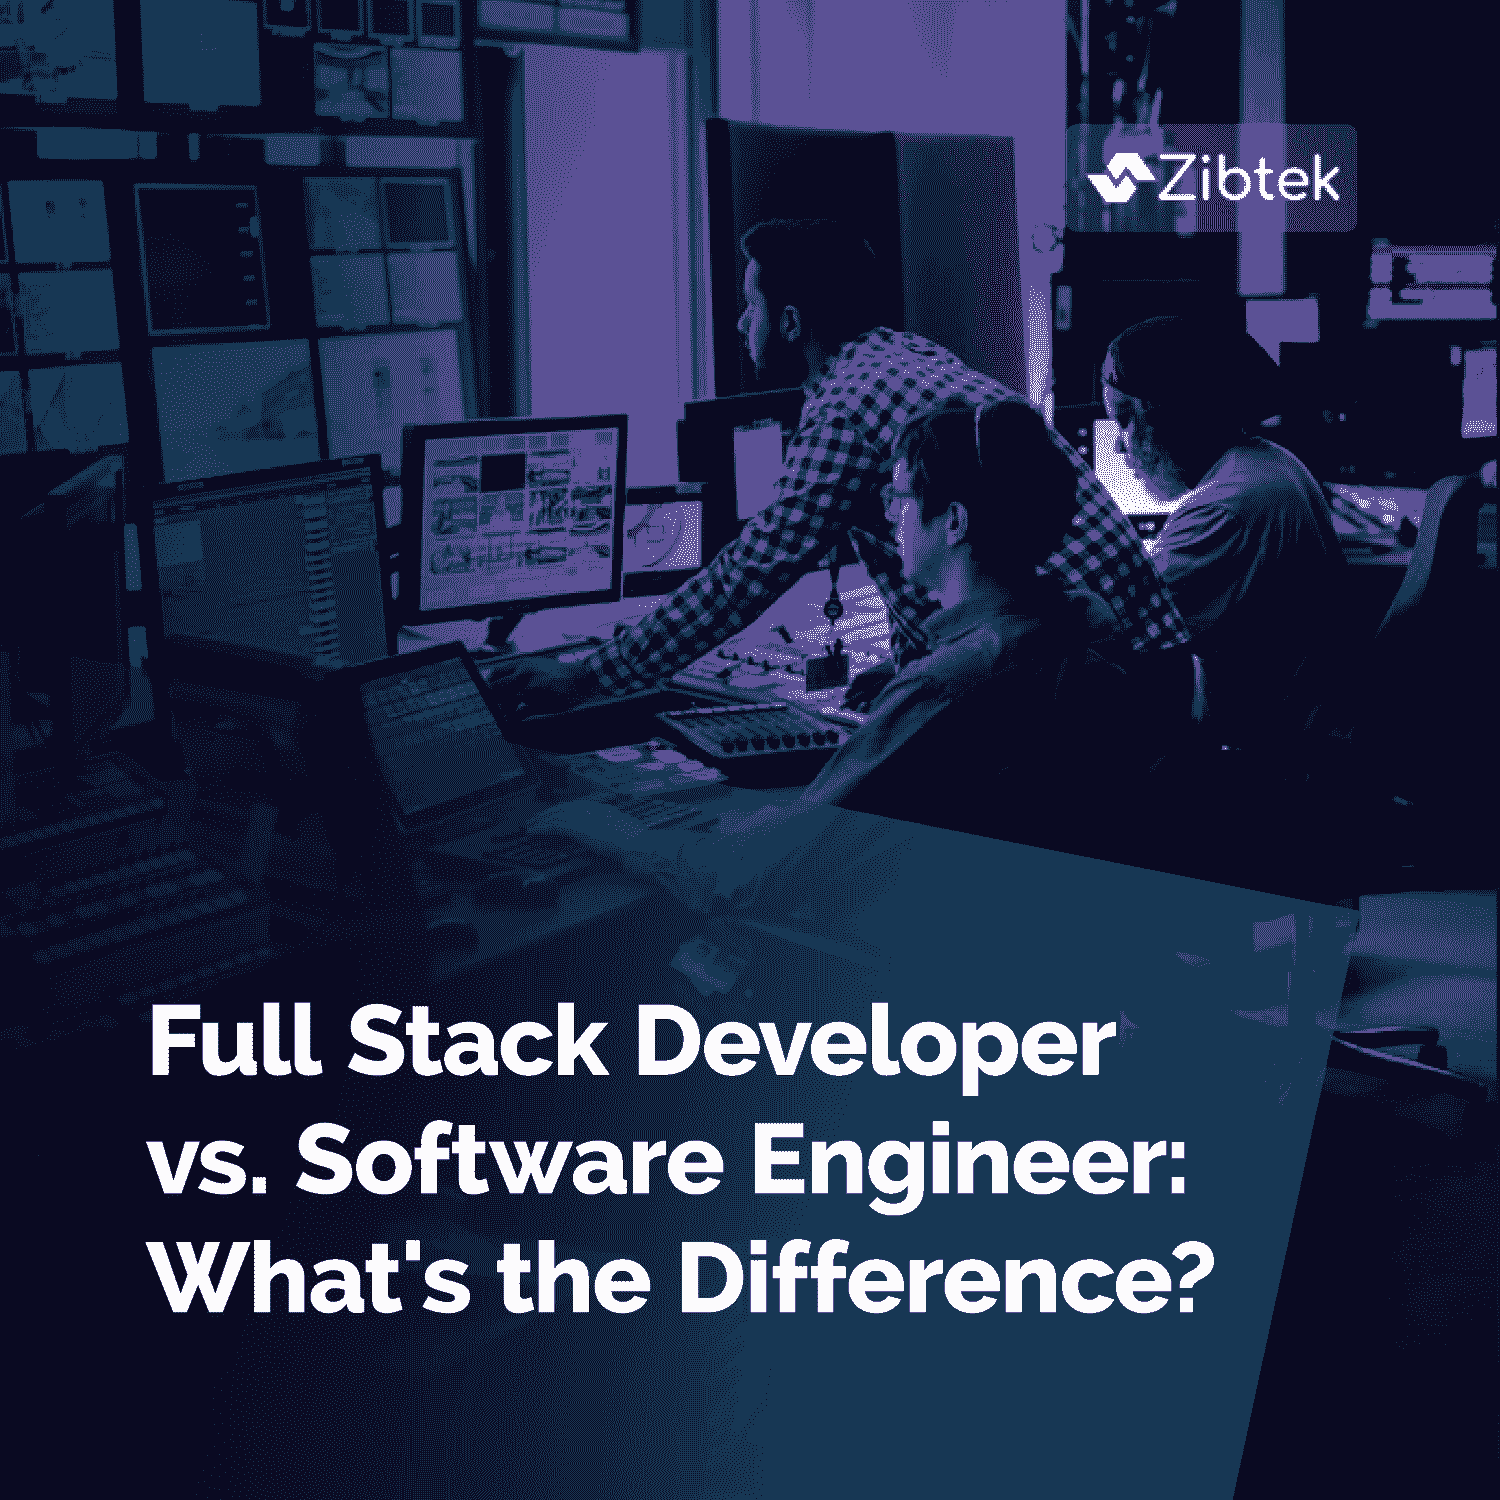 Full Stack Developer vs Software Engineer: What's the Difference?